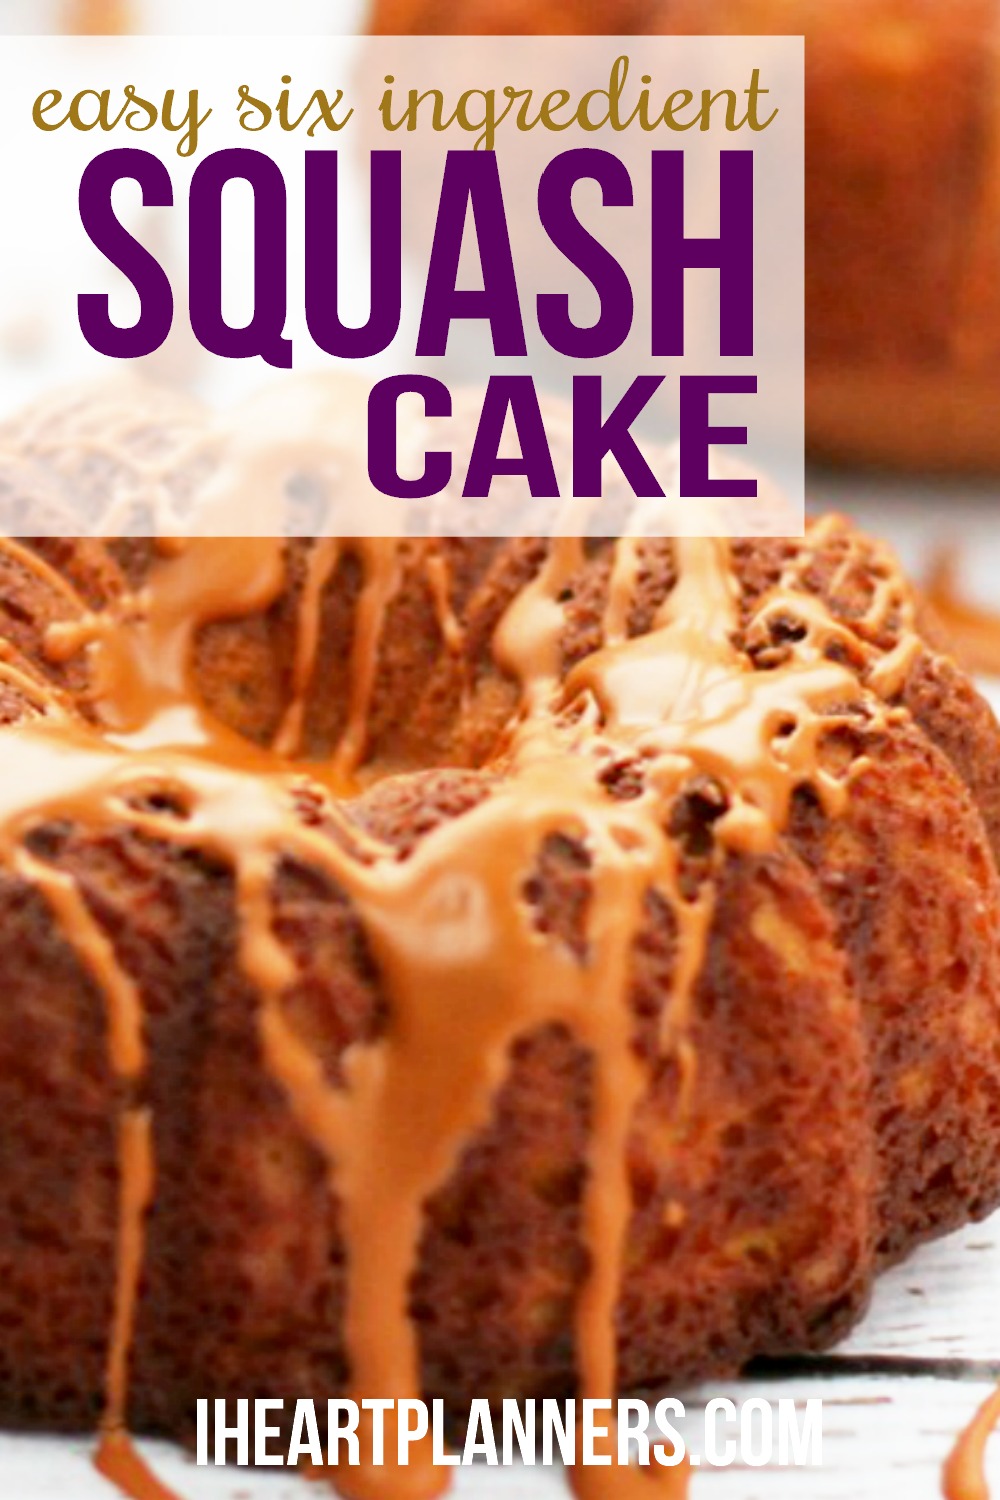 This six ingredient squash cake is super moist and yummy. If you have picky eaters, this recipe is the perfect way to serve dessert with vegetables.